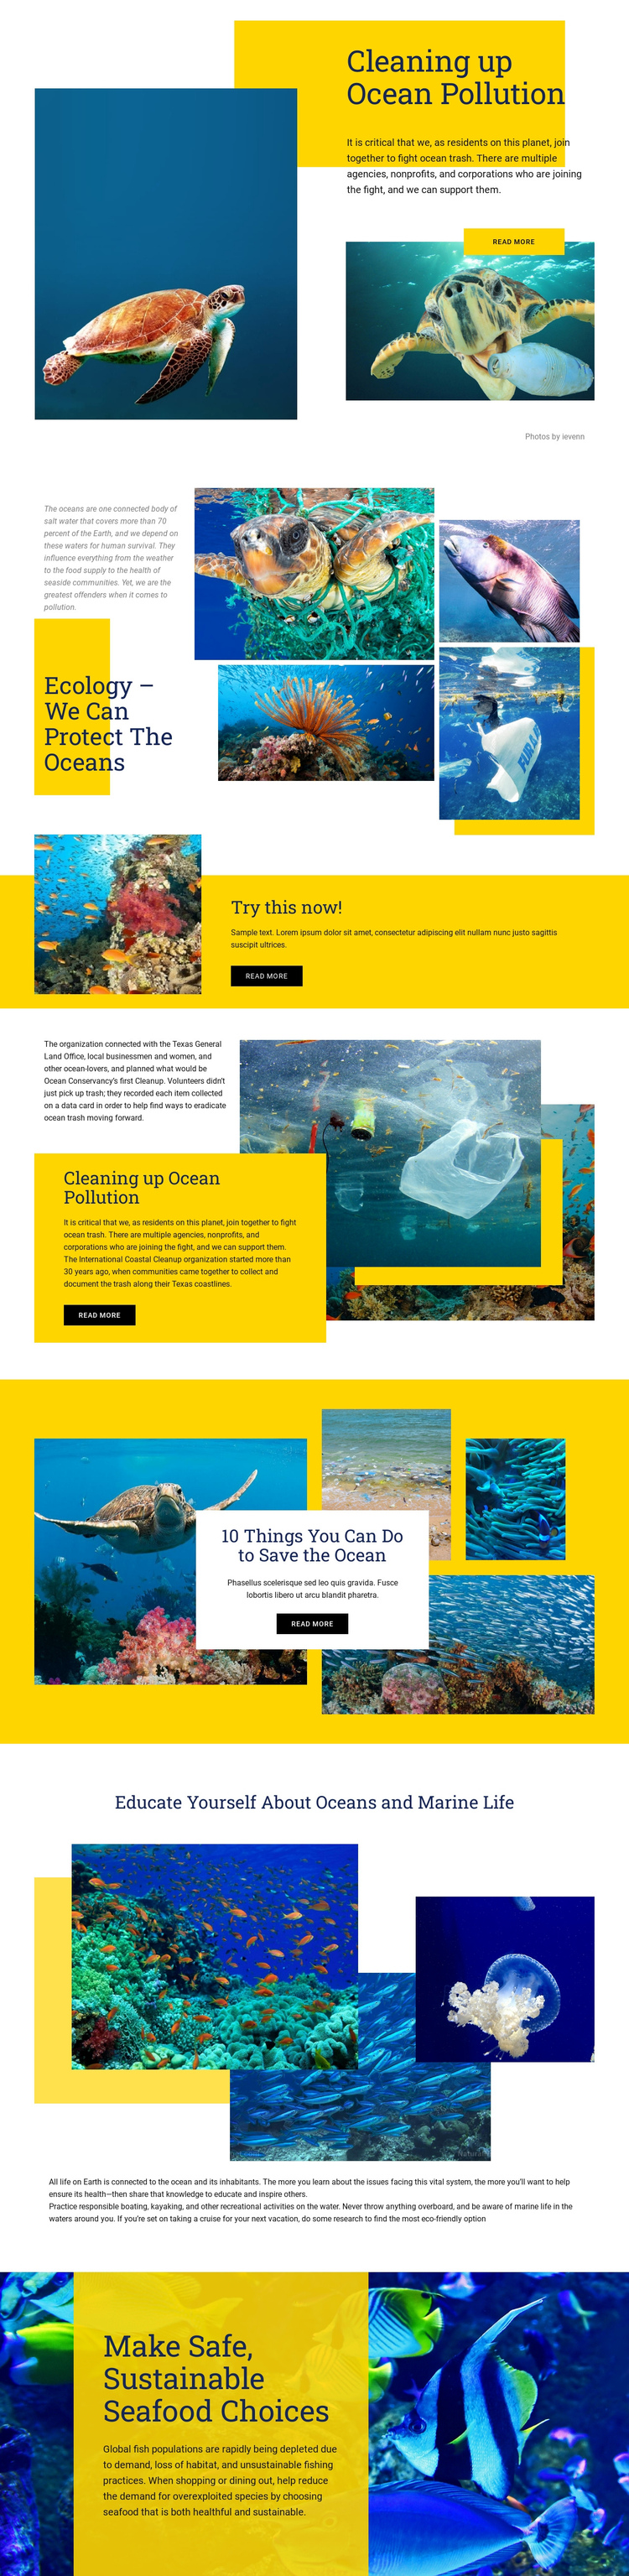 Protect The Oceans Website Builder Software